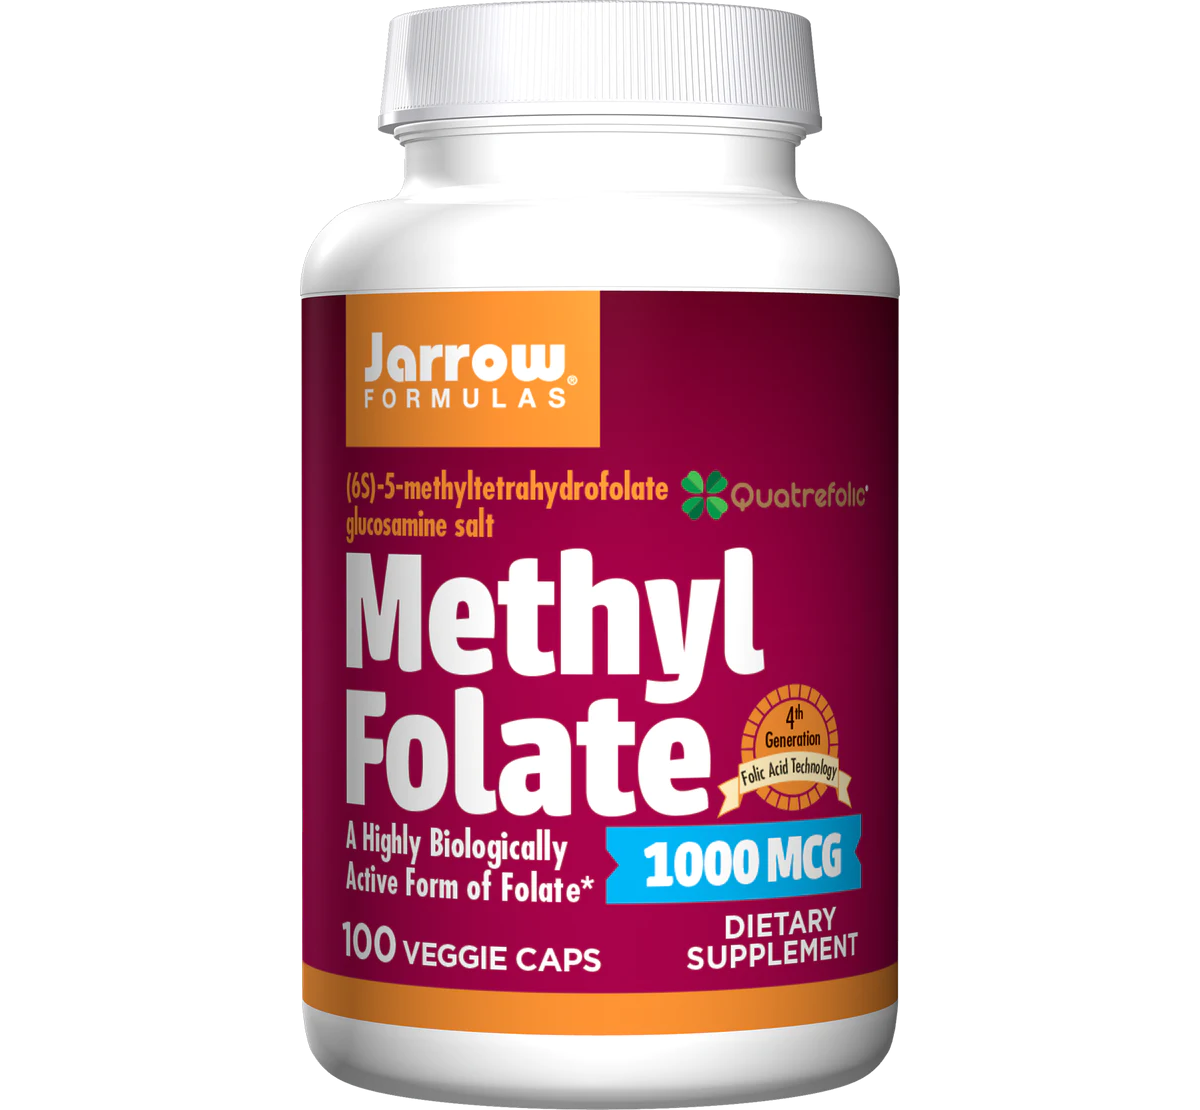 Methyl folate 1000 mcg (Upon Request) Supplement